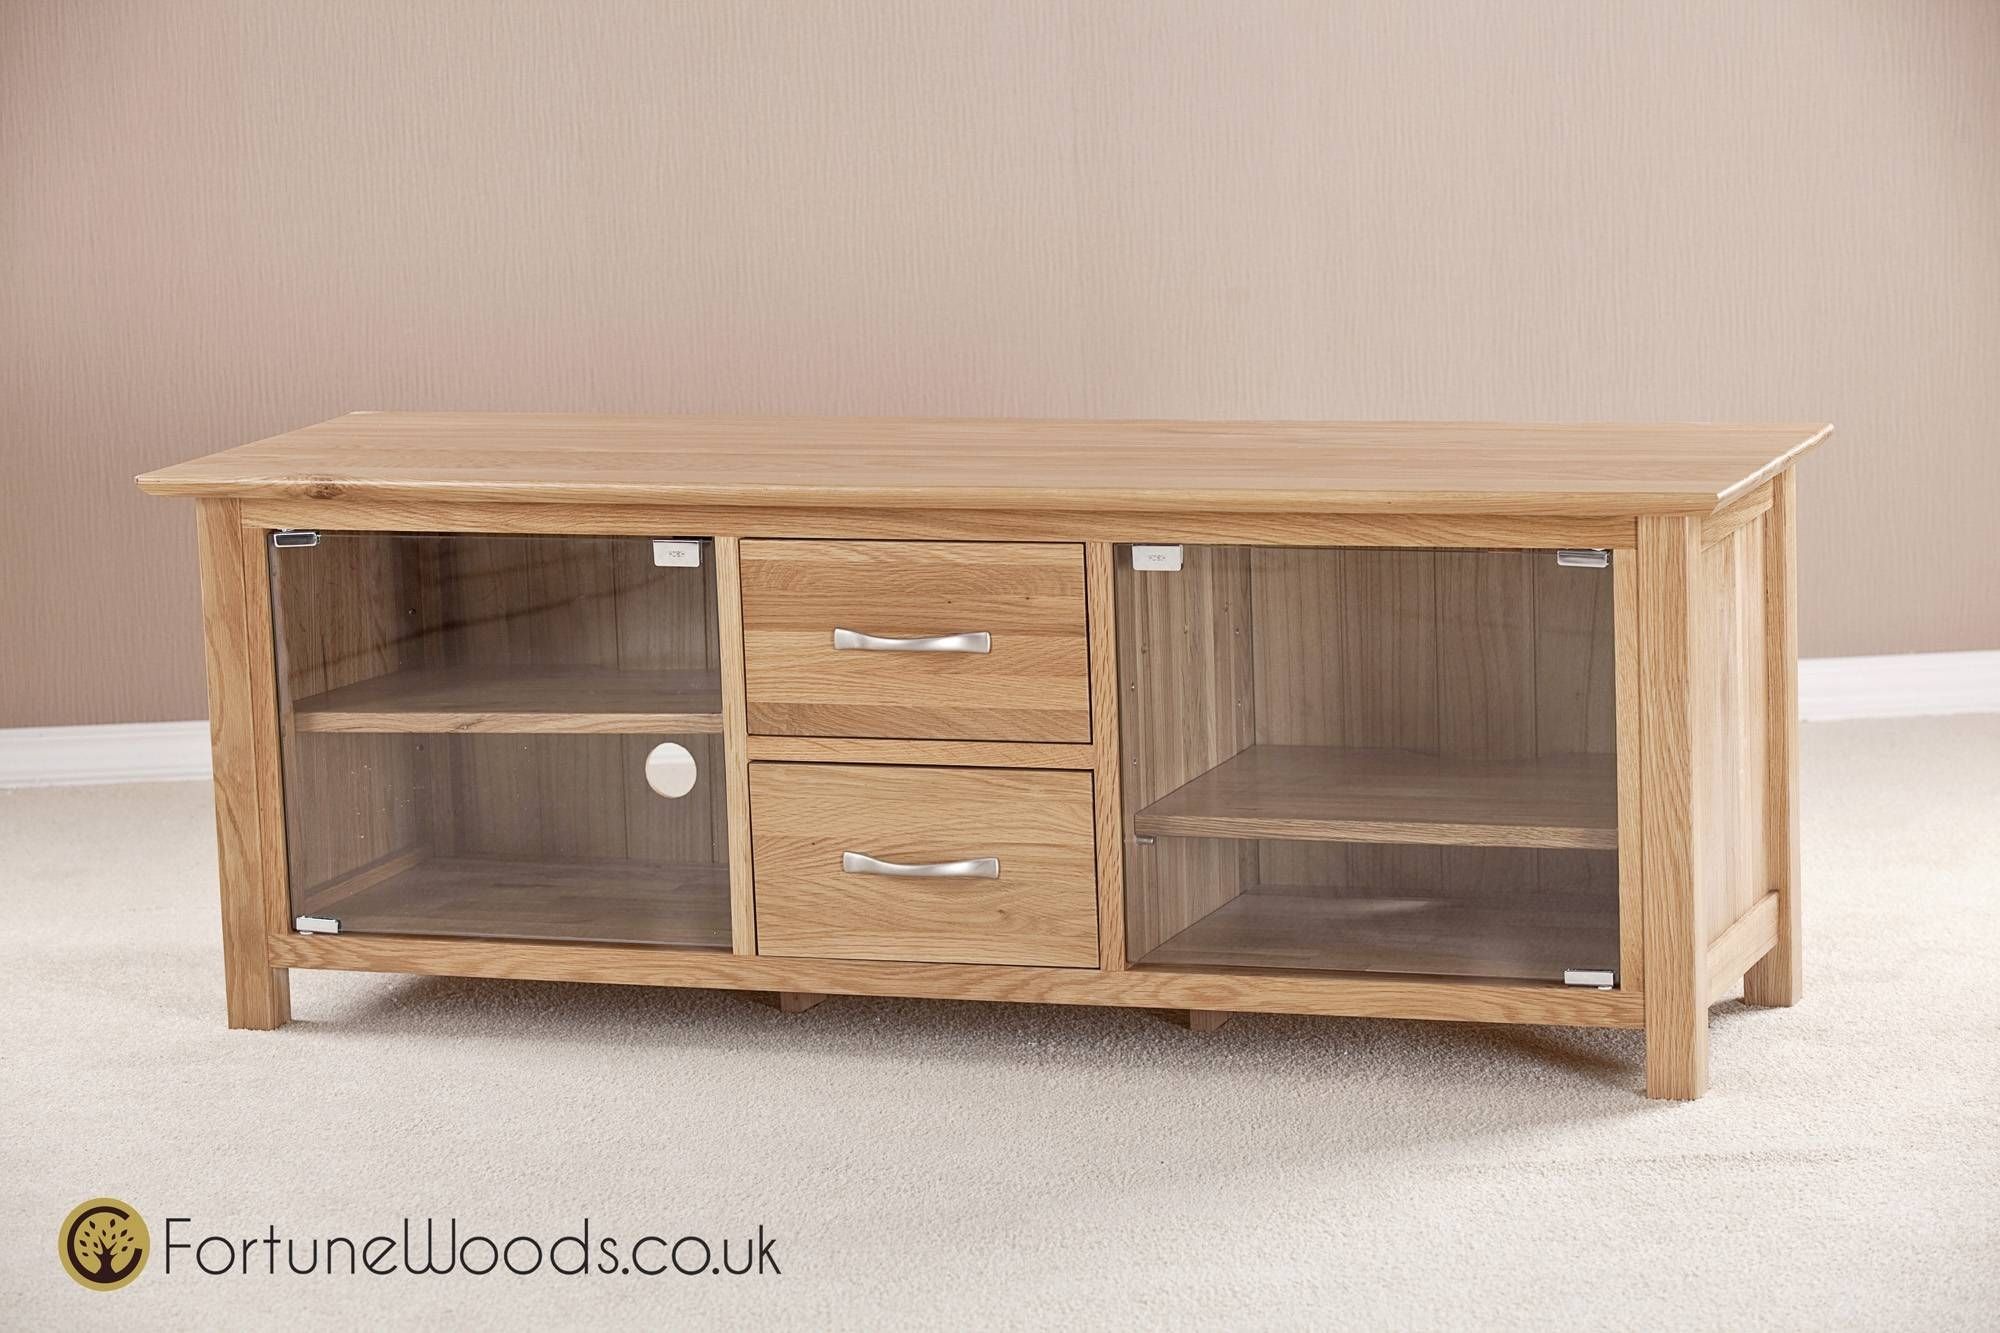 Large Oak Tv Unit With Glass Doors Intended For Glass Tv Cabinets With Doors (View 1 of 15)